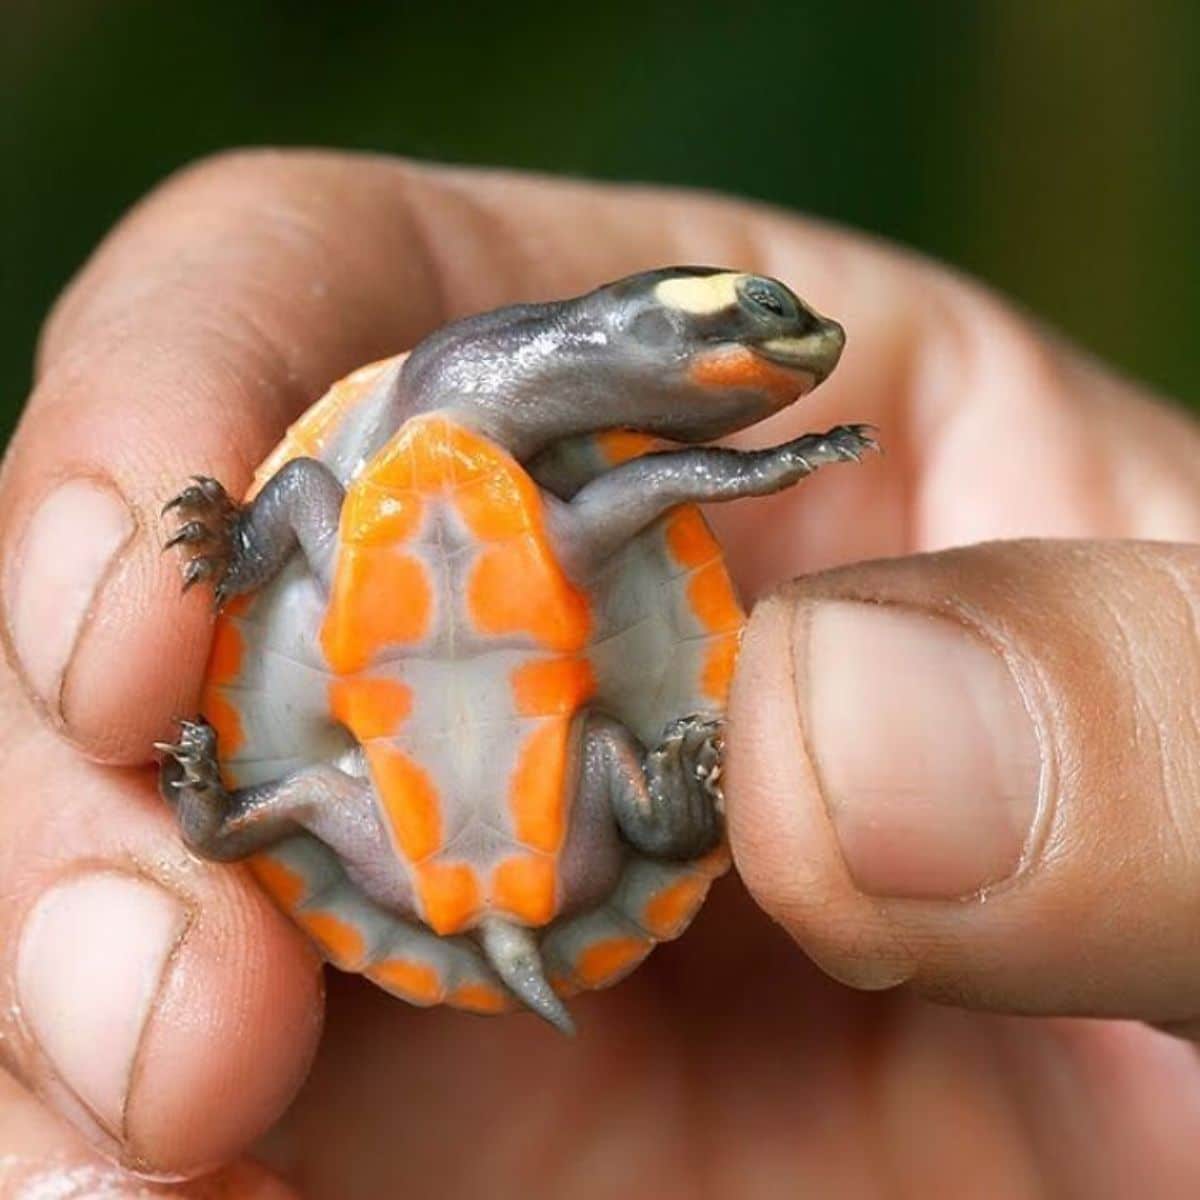 baby turtle held up by someone showing the white and orange stomach